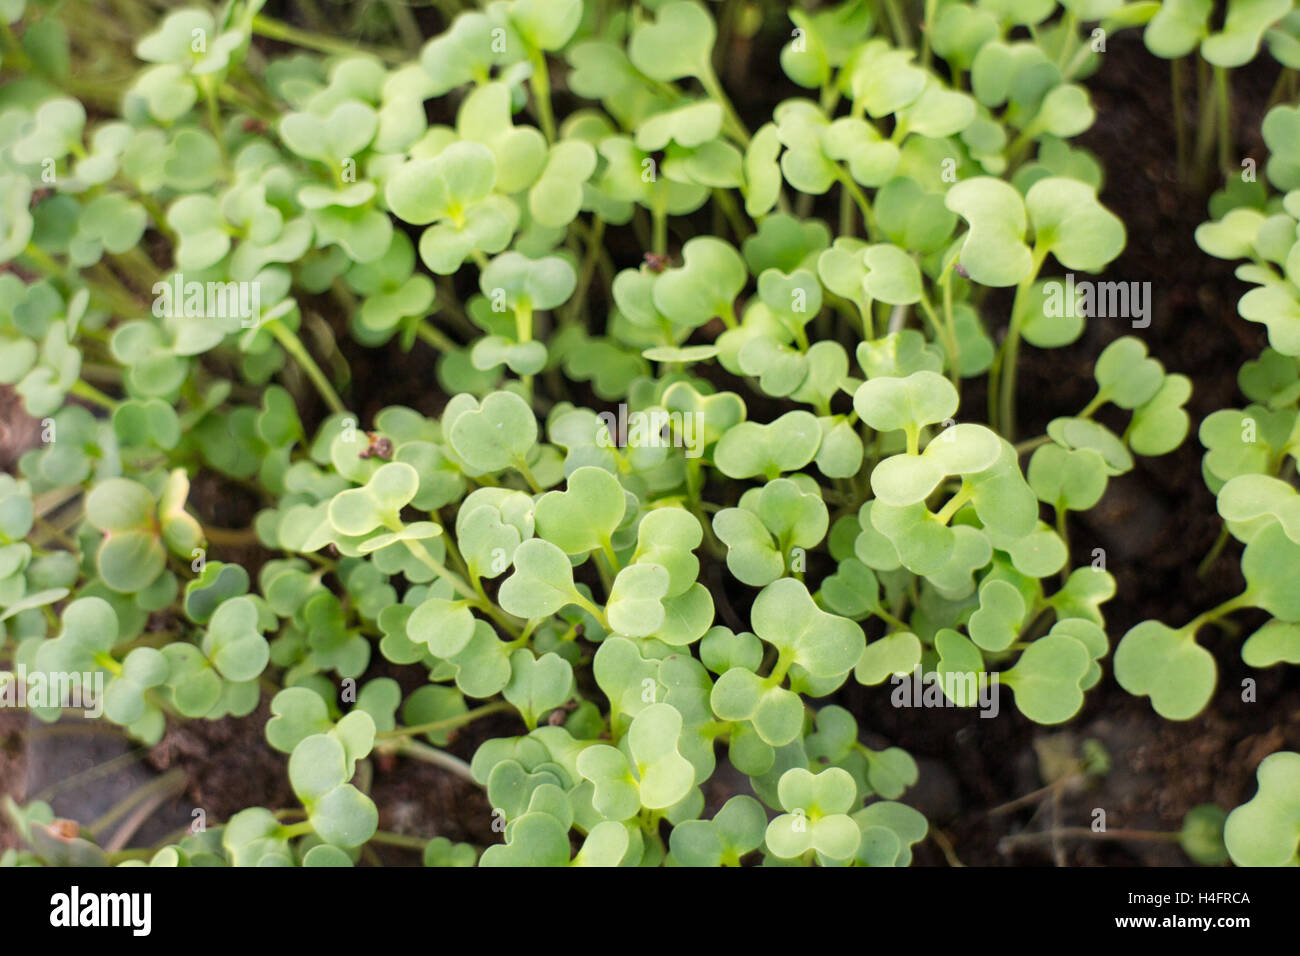 Green small plants growing, farm inspired Stock Photo